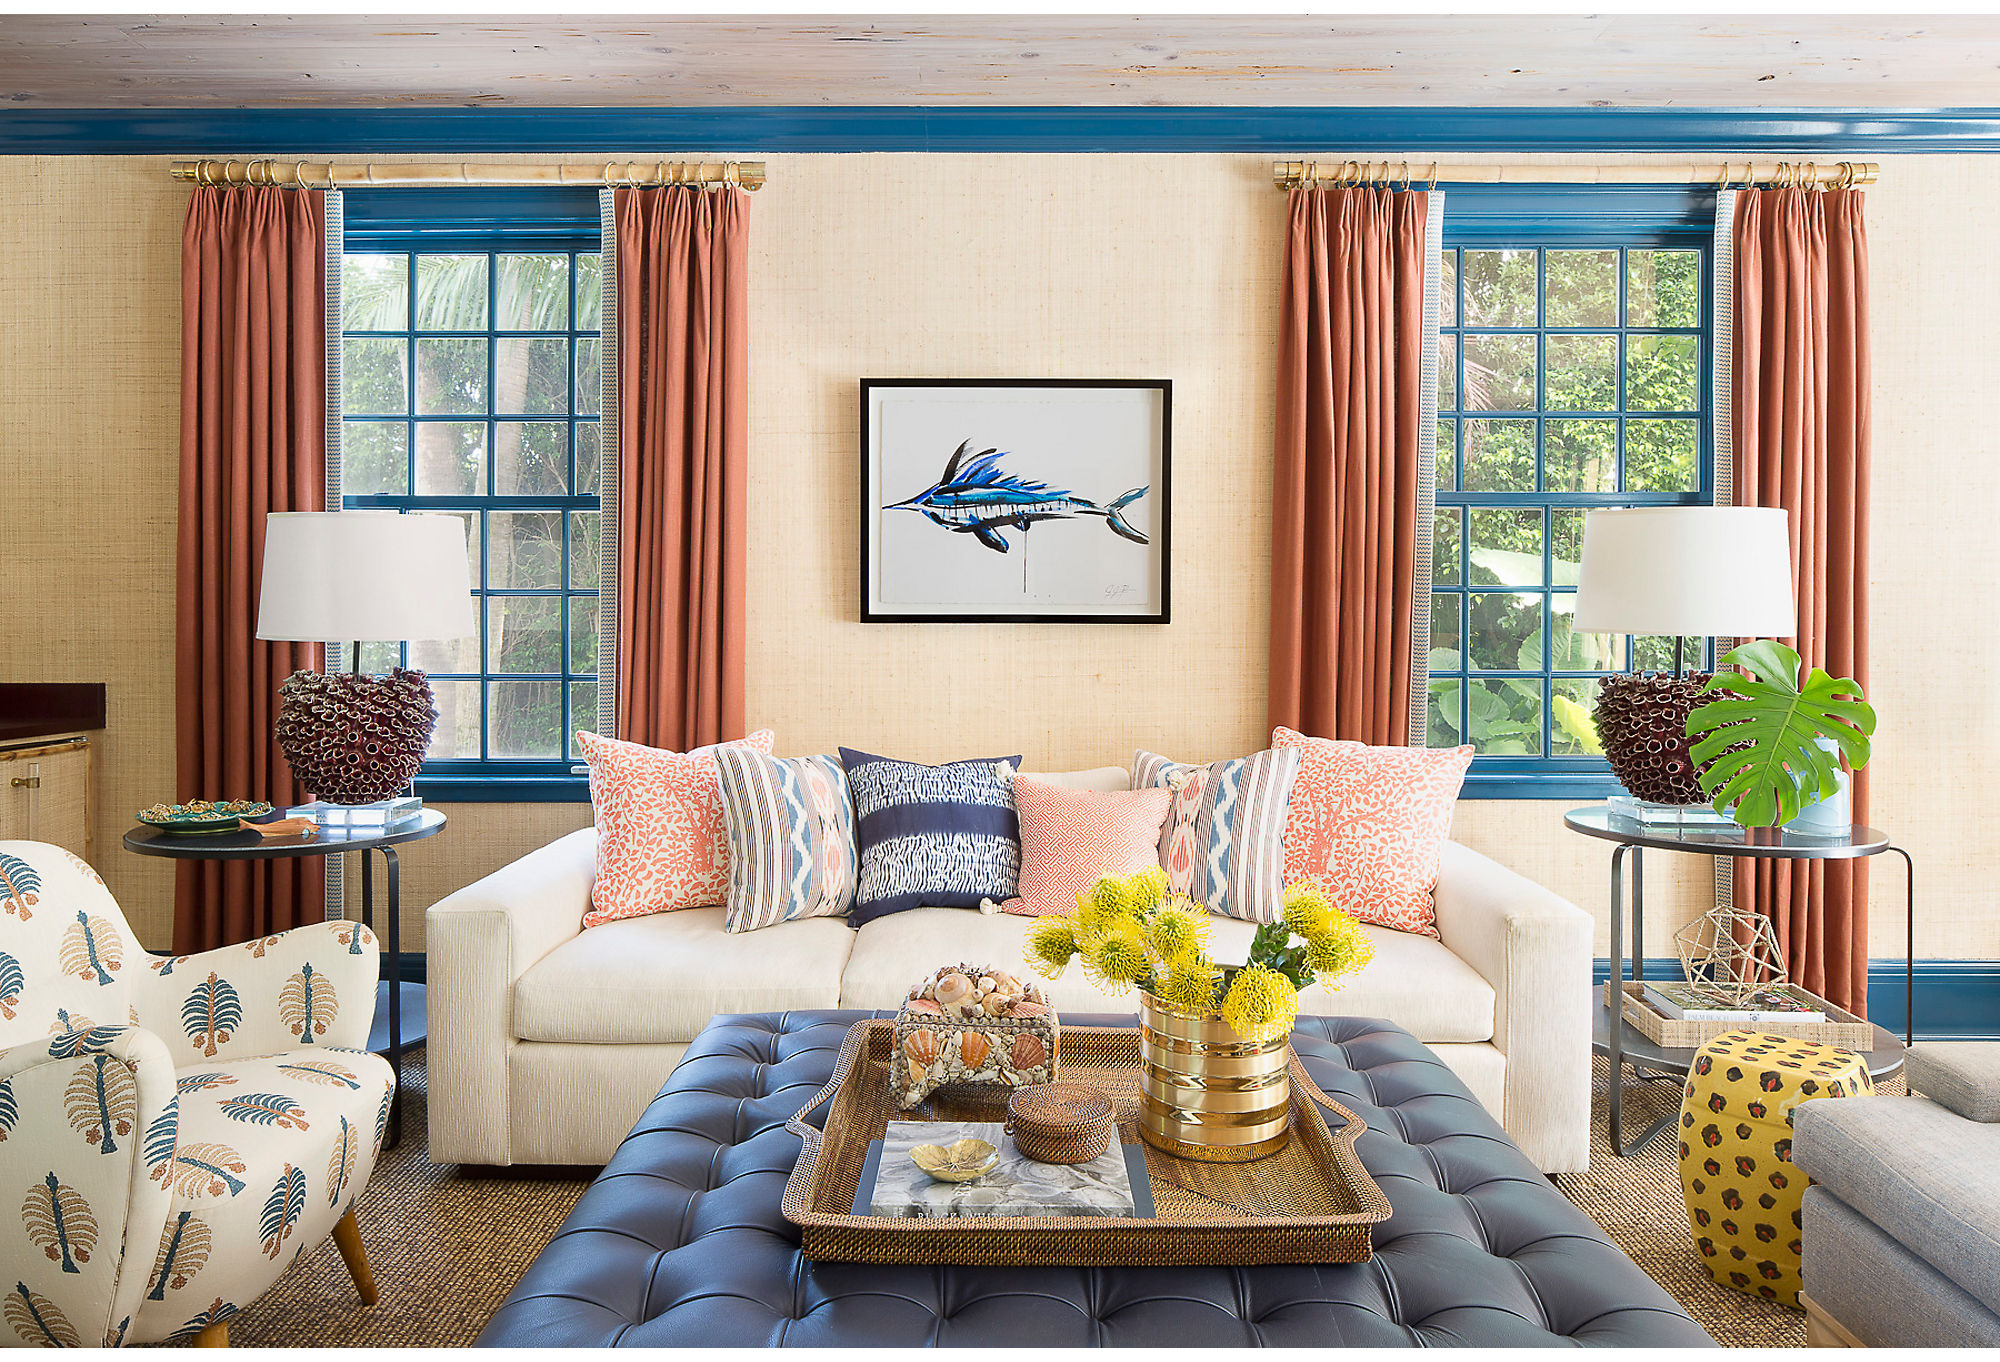 Celerie’s use of color and pattern gives this room a fresh take on coastal living. Photo by Carmel Brantley. Design by Kemble Interiors, Inc.
